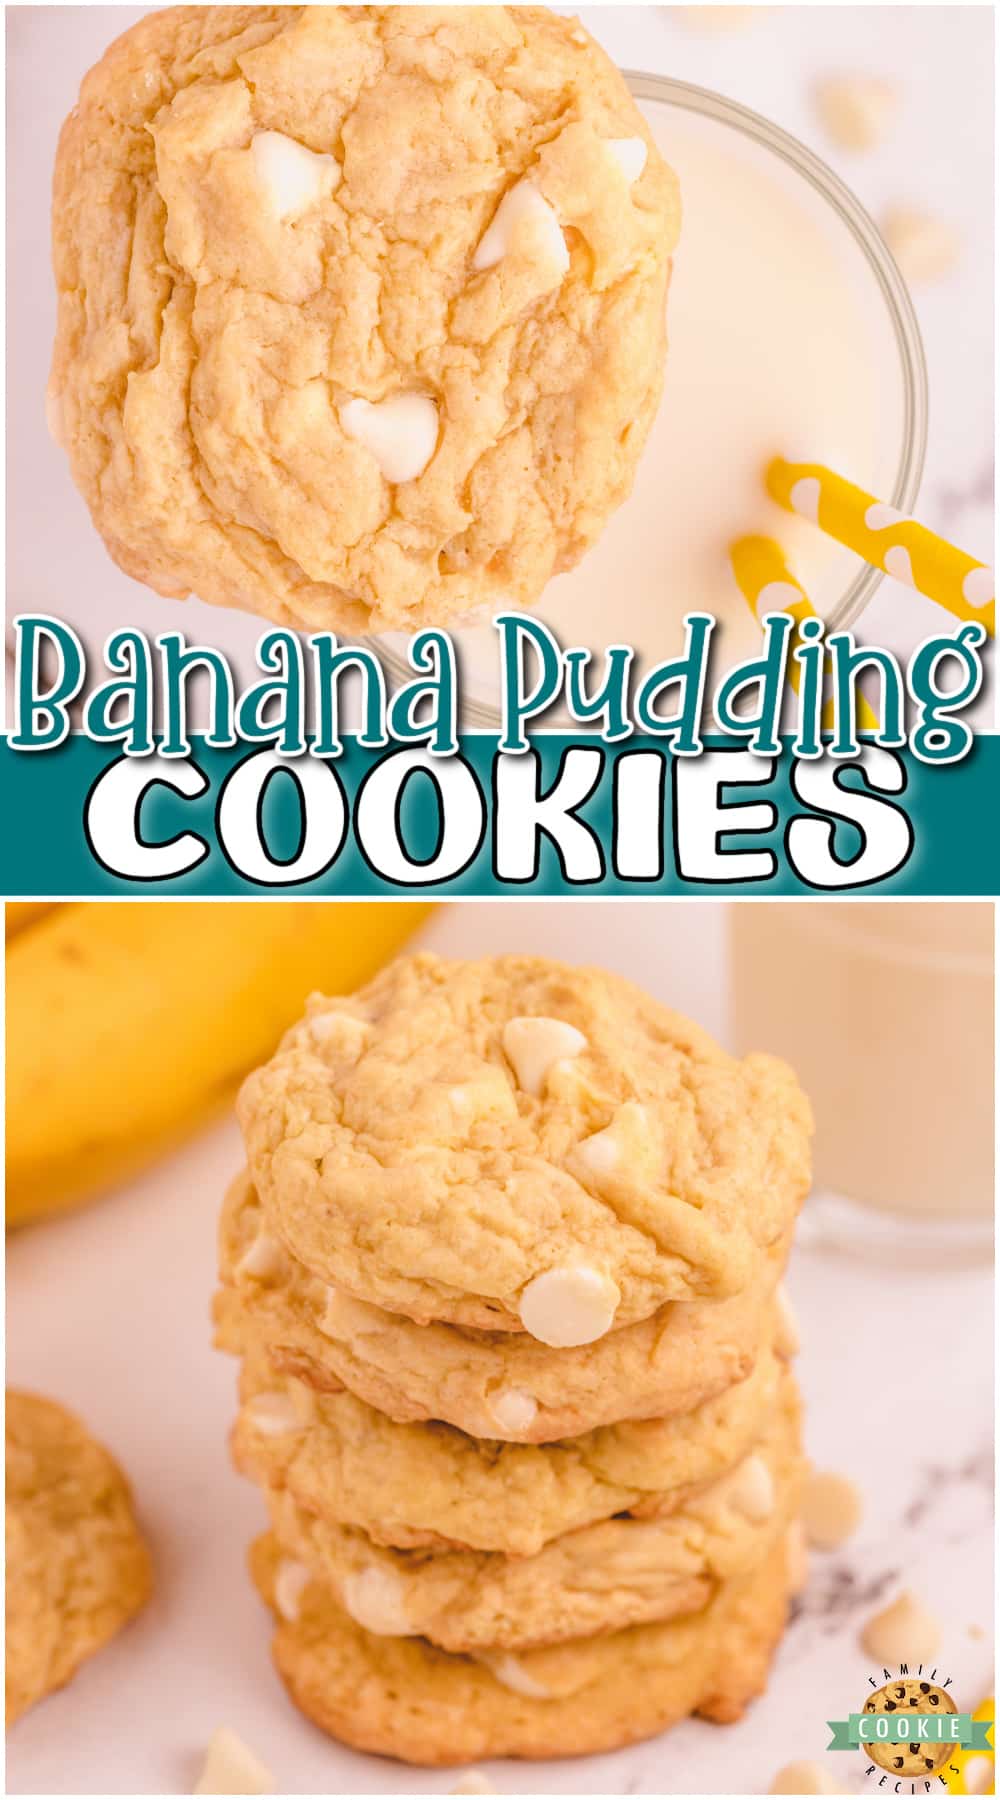 Banana Pudding Cookies made with a ripe banana for amazing pillowy soft cookies with great banana flavor! Banana cream cookies with pudding mix & white chocolate chips are delicious!